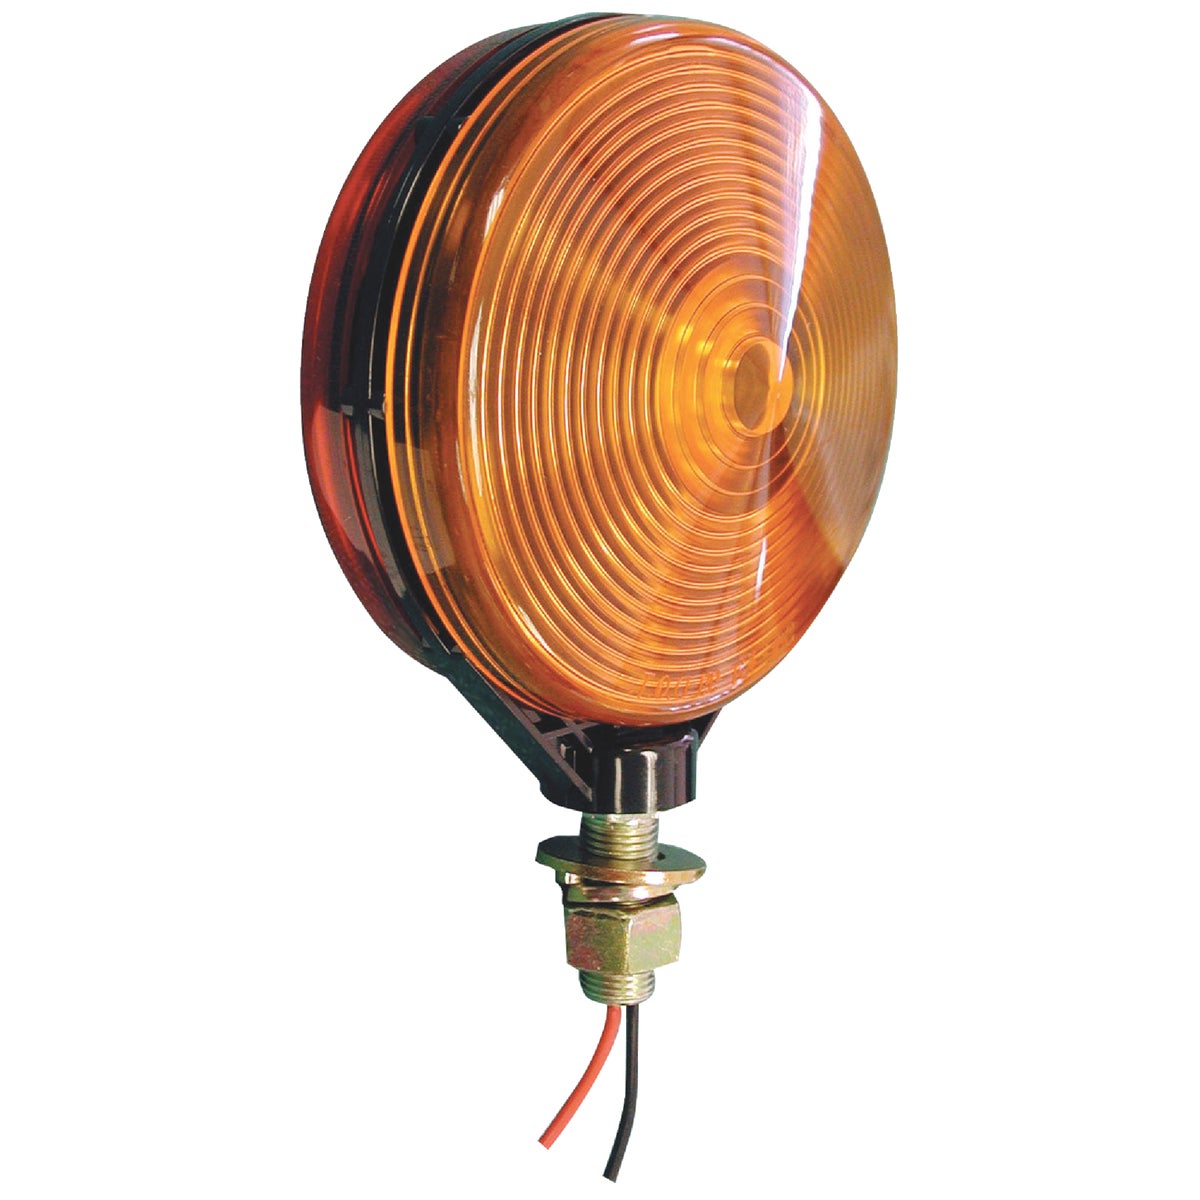 Item 575489, Pedestal mount, double-face red/amber light functions as a combination turn